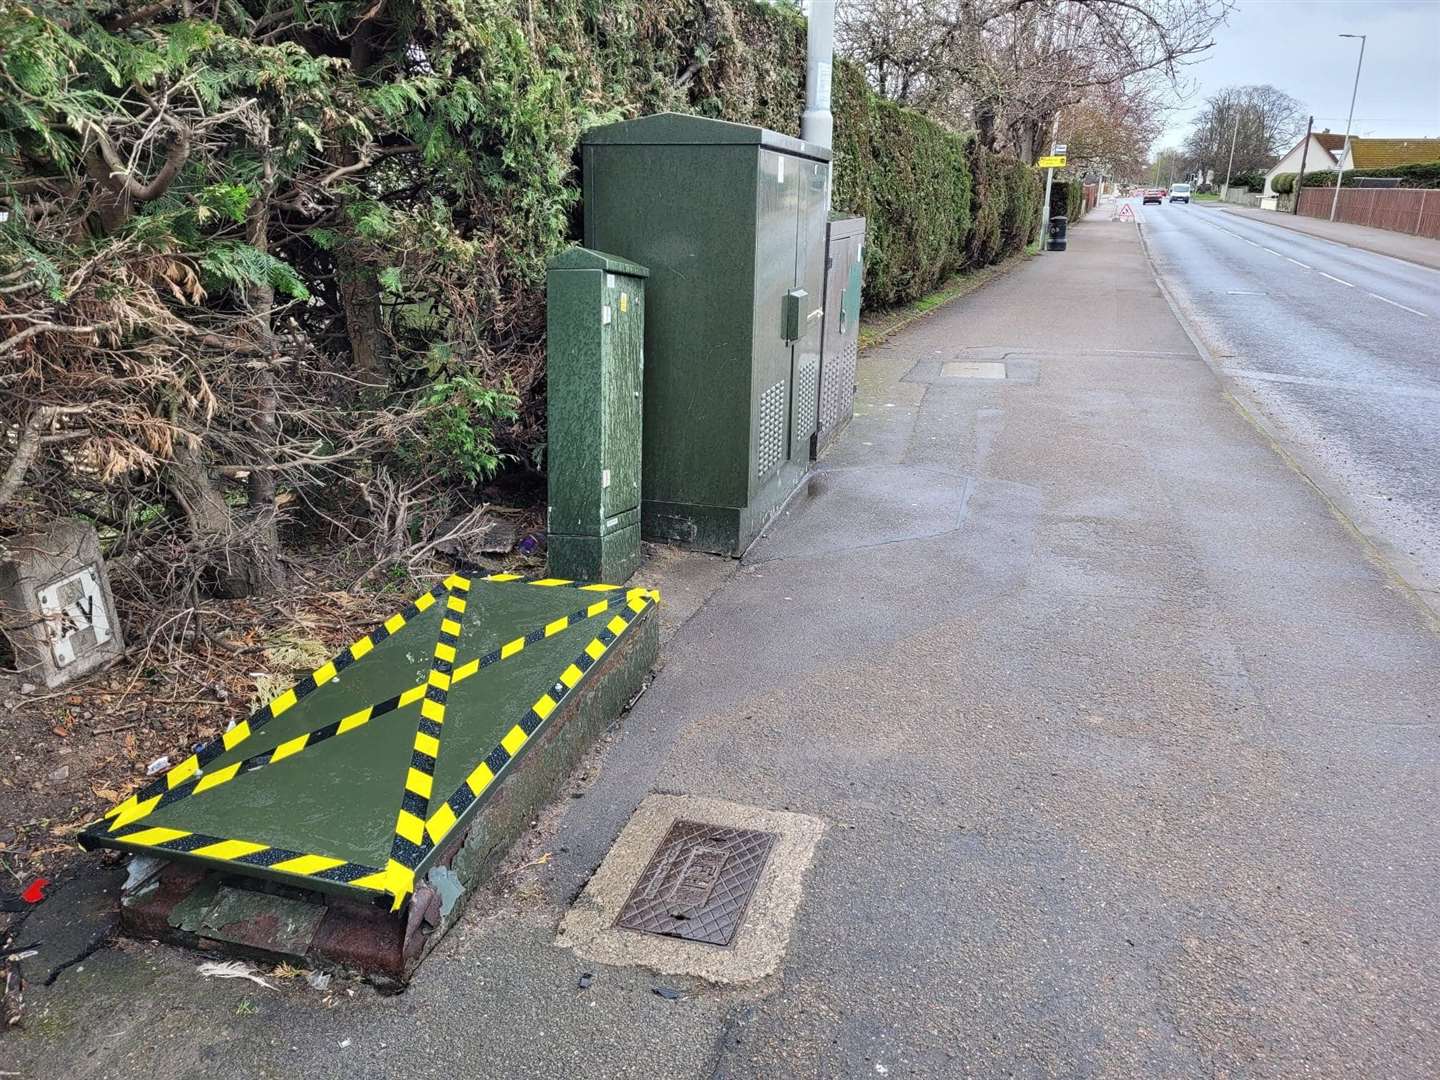 The badly damaged telecommunication box has since been removed.